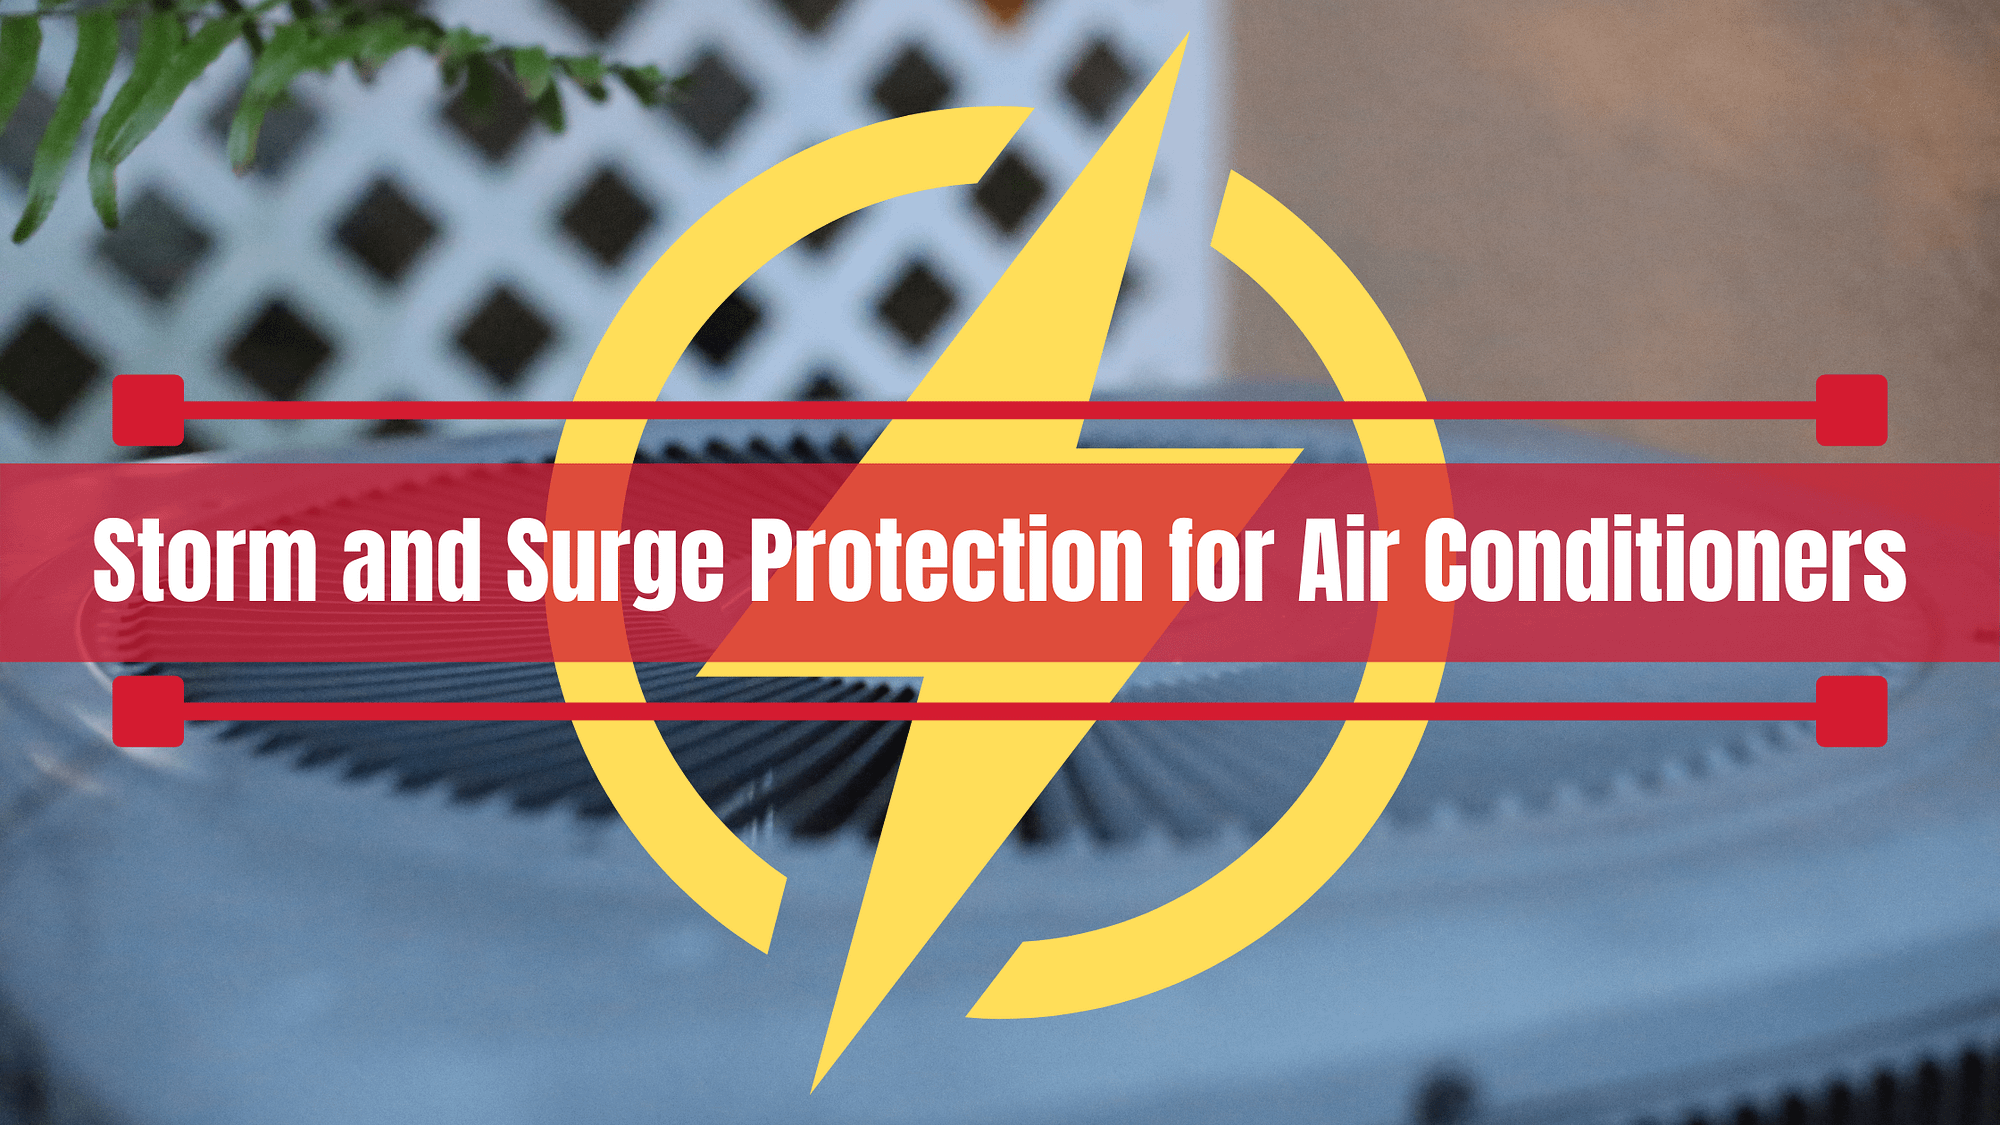 Storm and Surge Protection for Air Conditioners